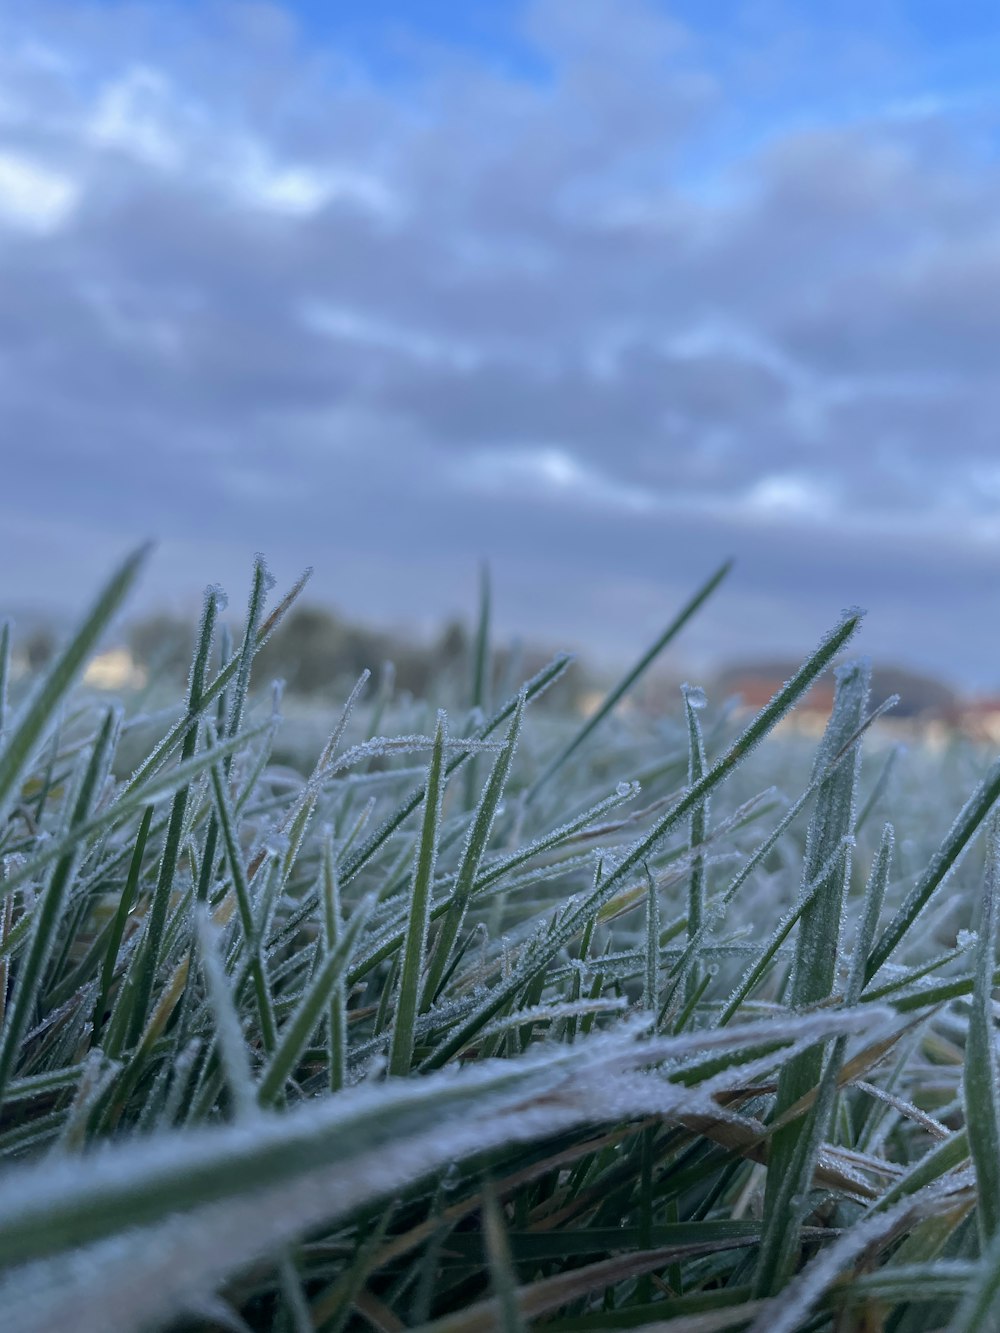 the grass is covered in ice and frost